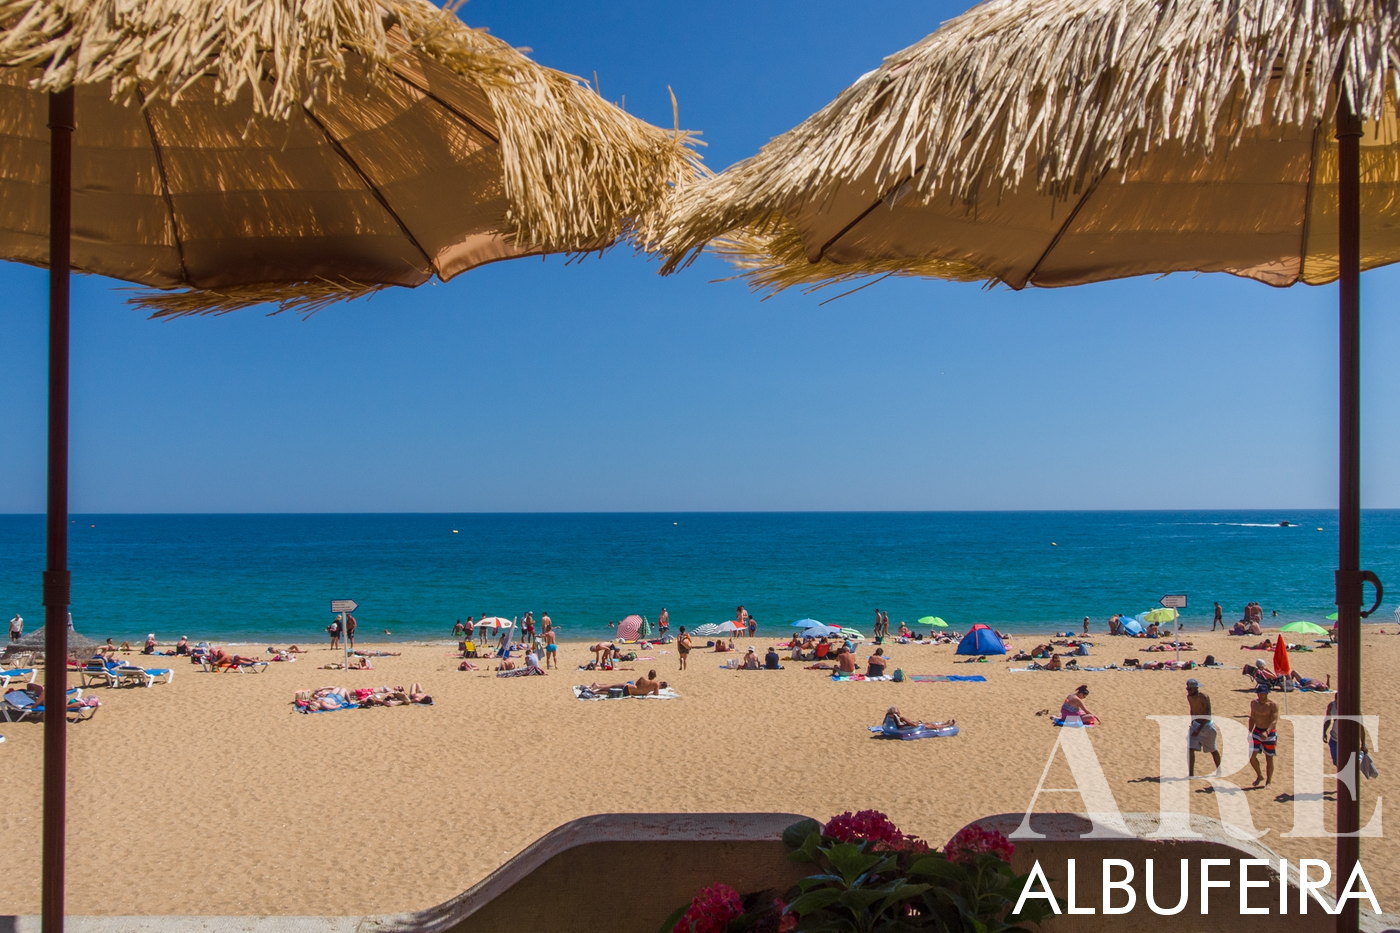 Albufeira beach image captured from beneath the beach umbrellas, featuring a sandy foreground, an expansive ocean view, and a serene sky above.